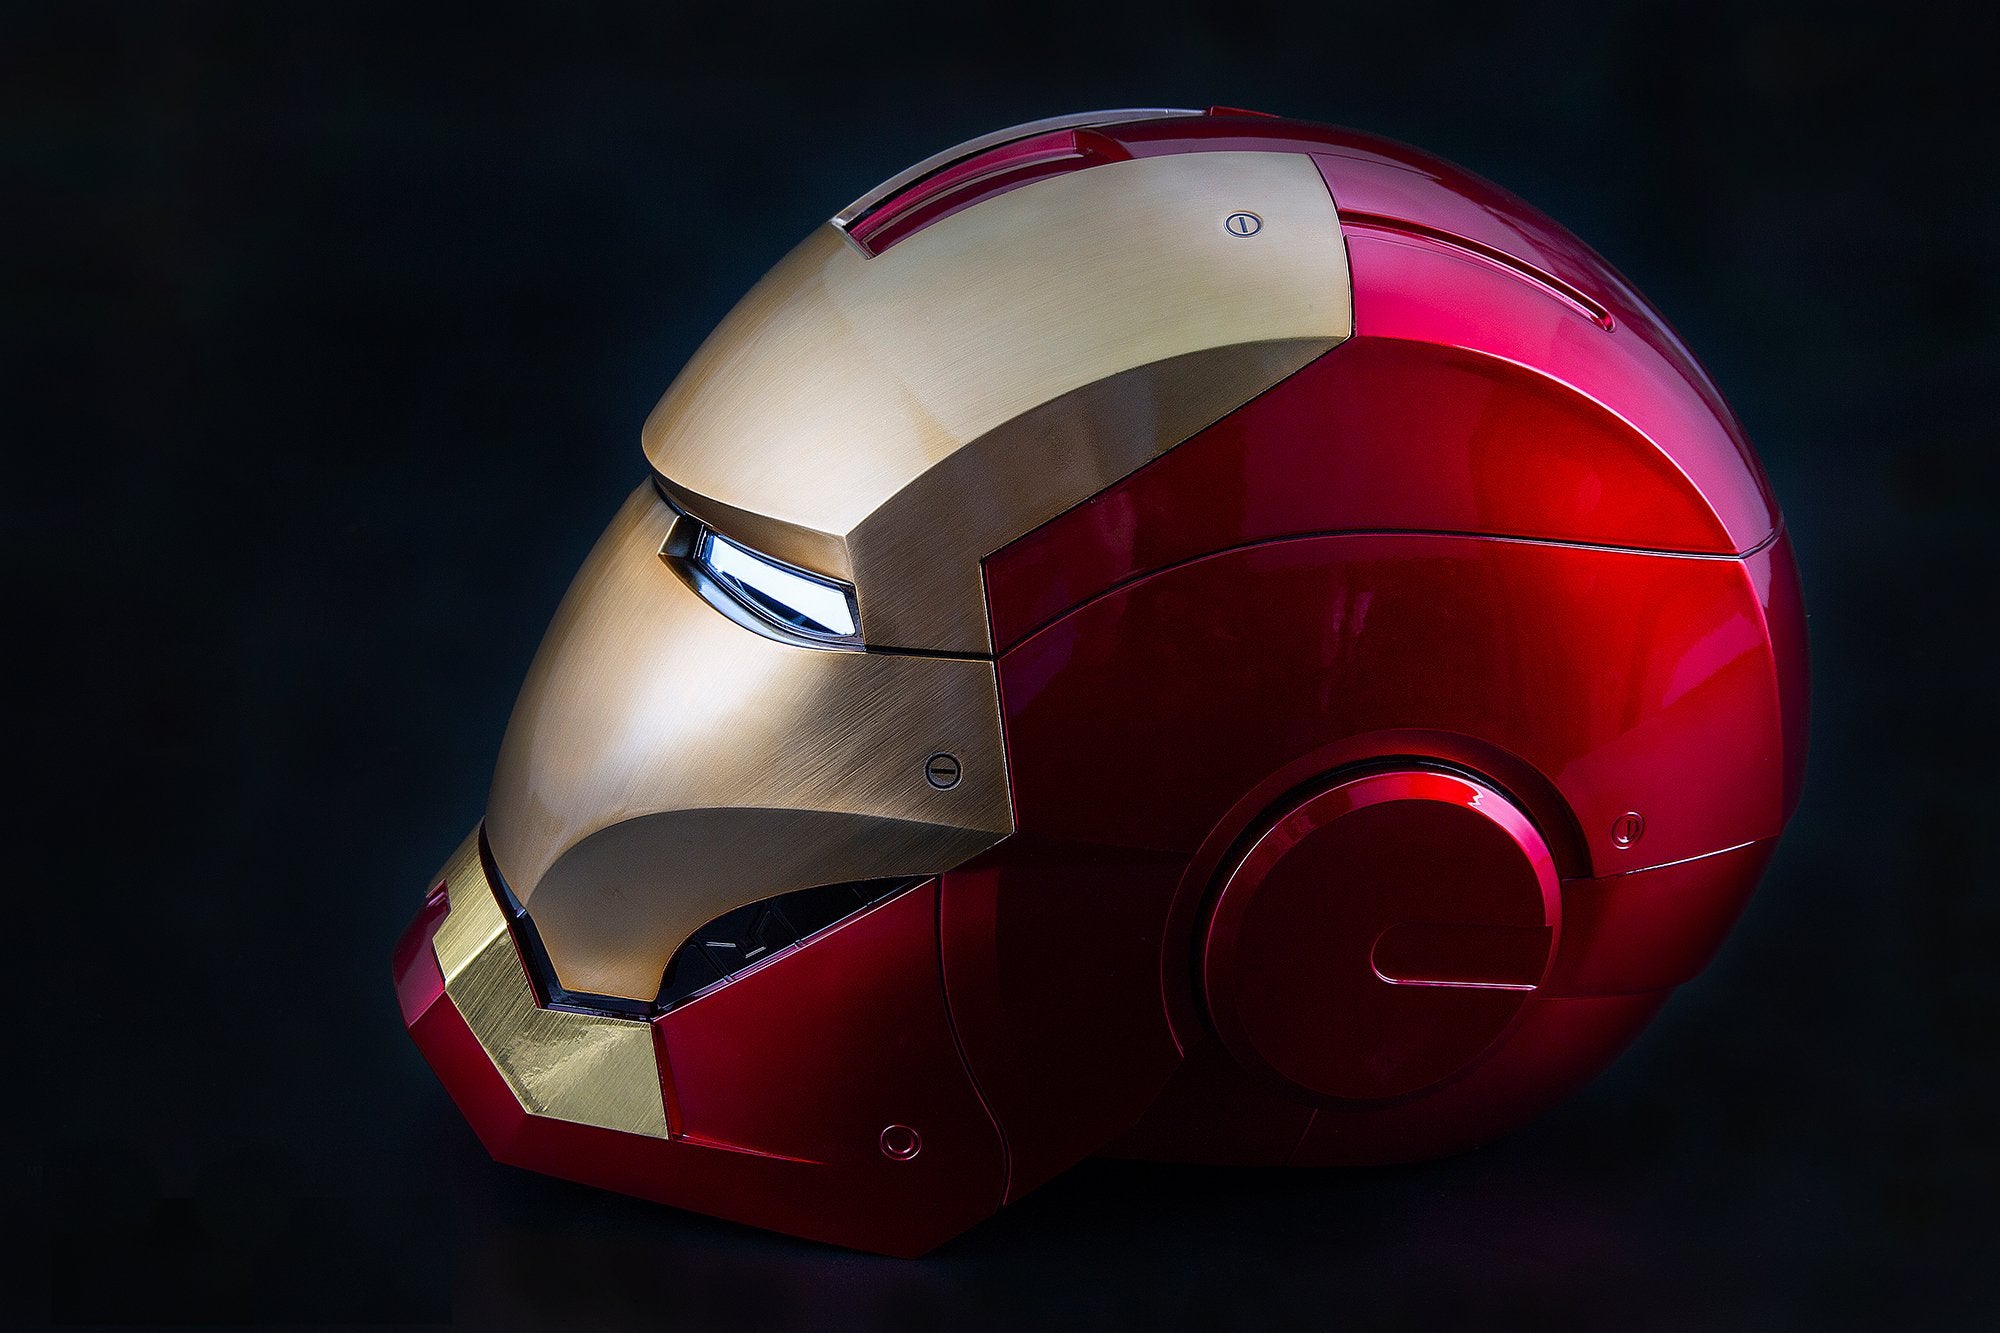 Killerbody - 1:1 Scale High End Replica - Avengers - Iron Man Mark VII Helmet (Wearable Voice Control Brushed Finish) - Marvelous Toys